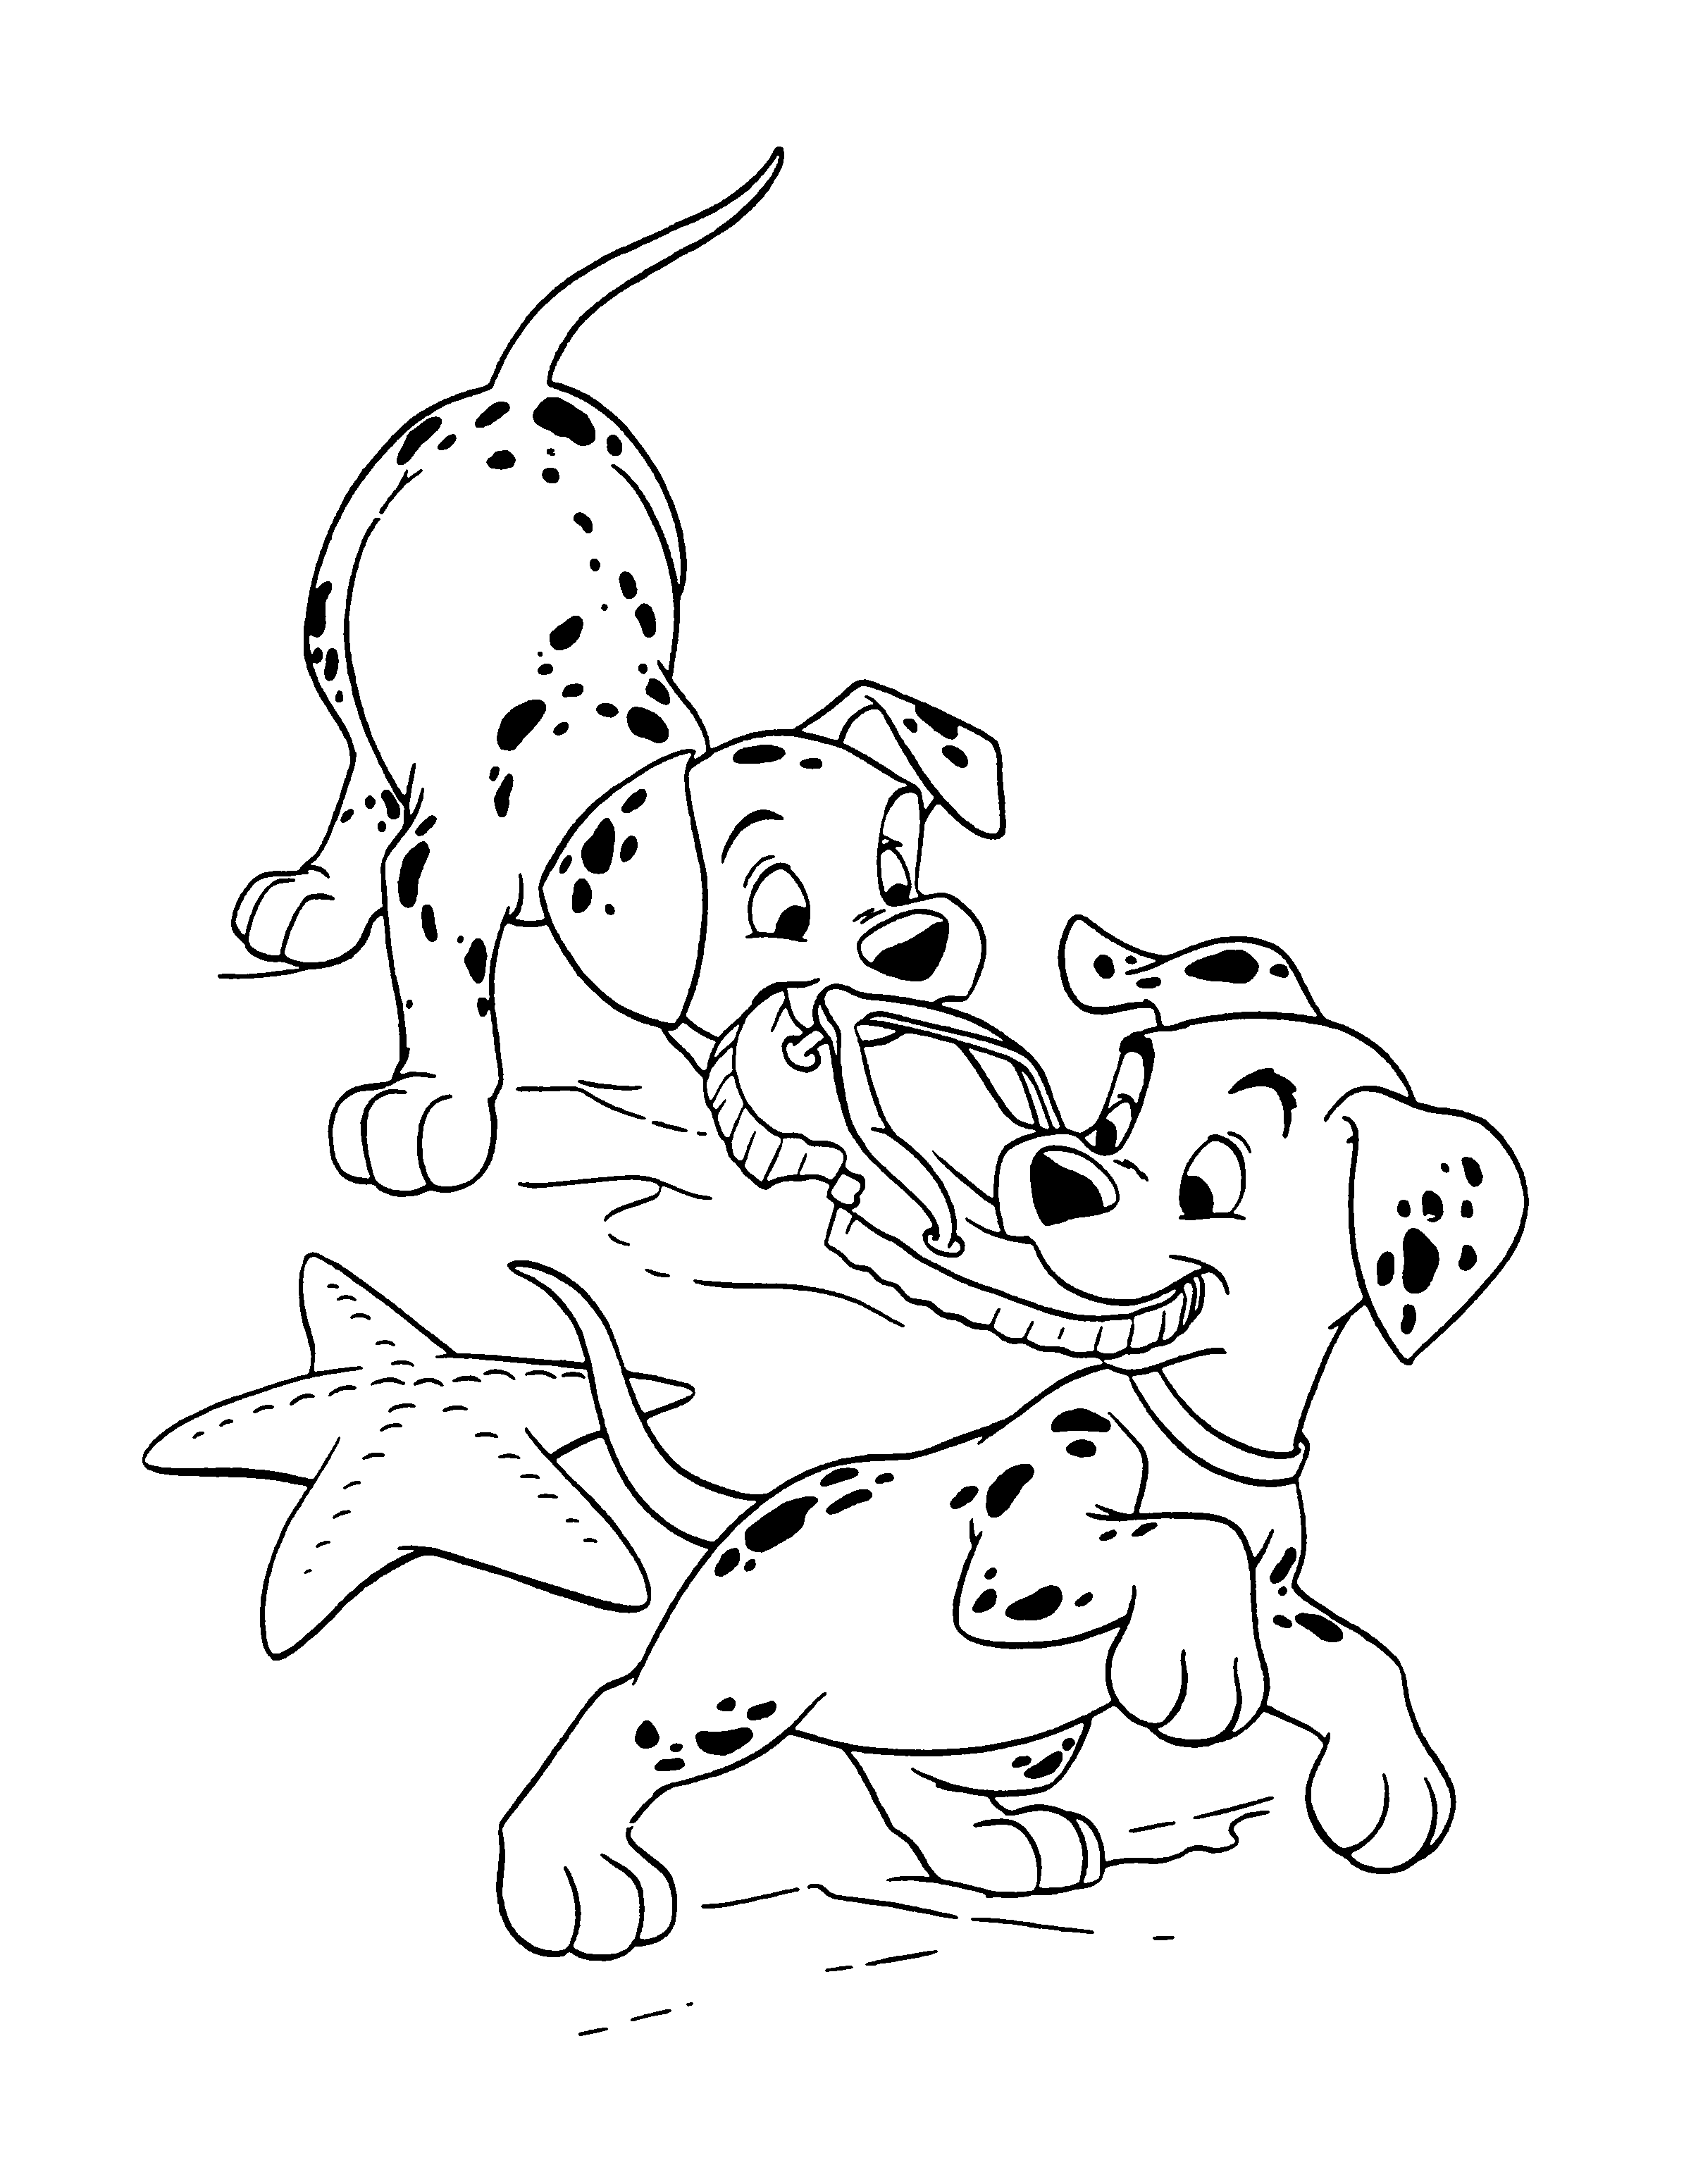 101 dalmatians to print for free 101 Dalmatians Kids Coloring Pages